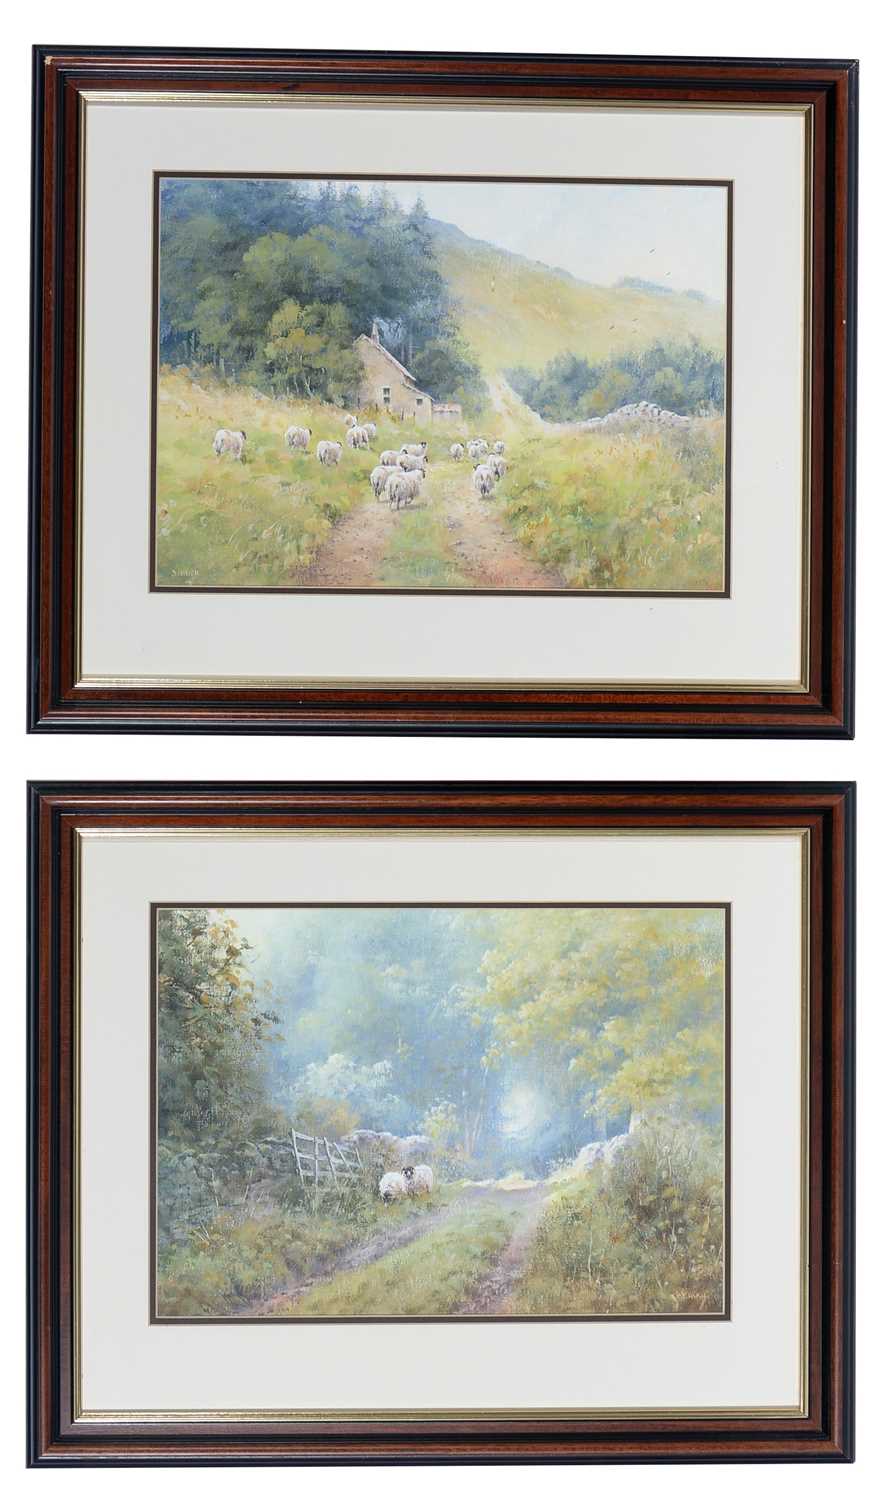 Lot 100 - Joe Hush - Squirrel Lane and Shepherds Cottage; tranquil summertime scenes | acrylic